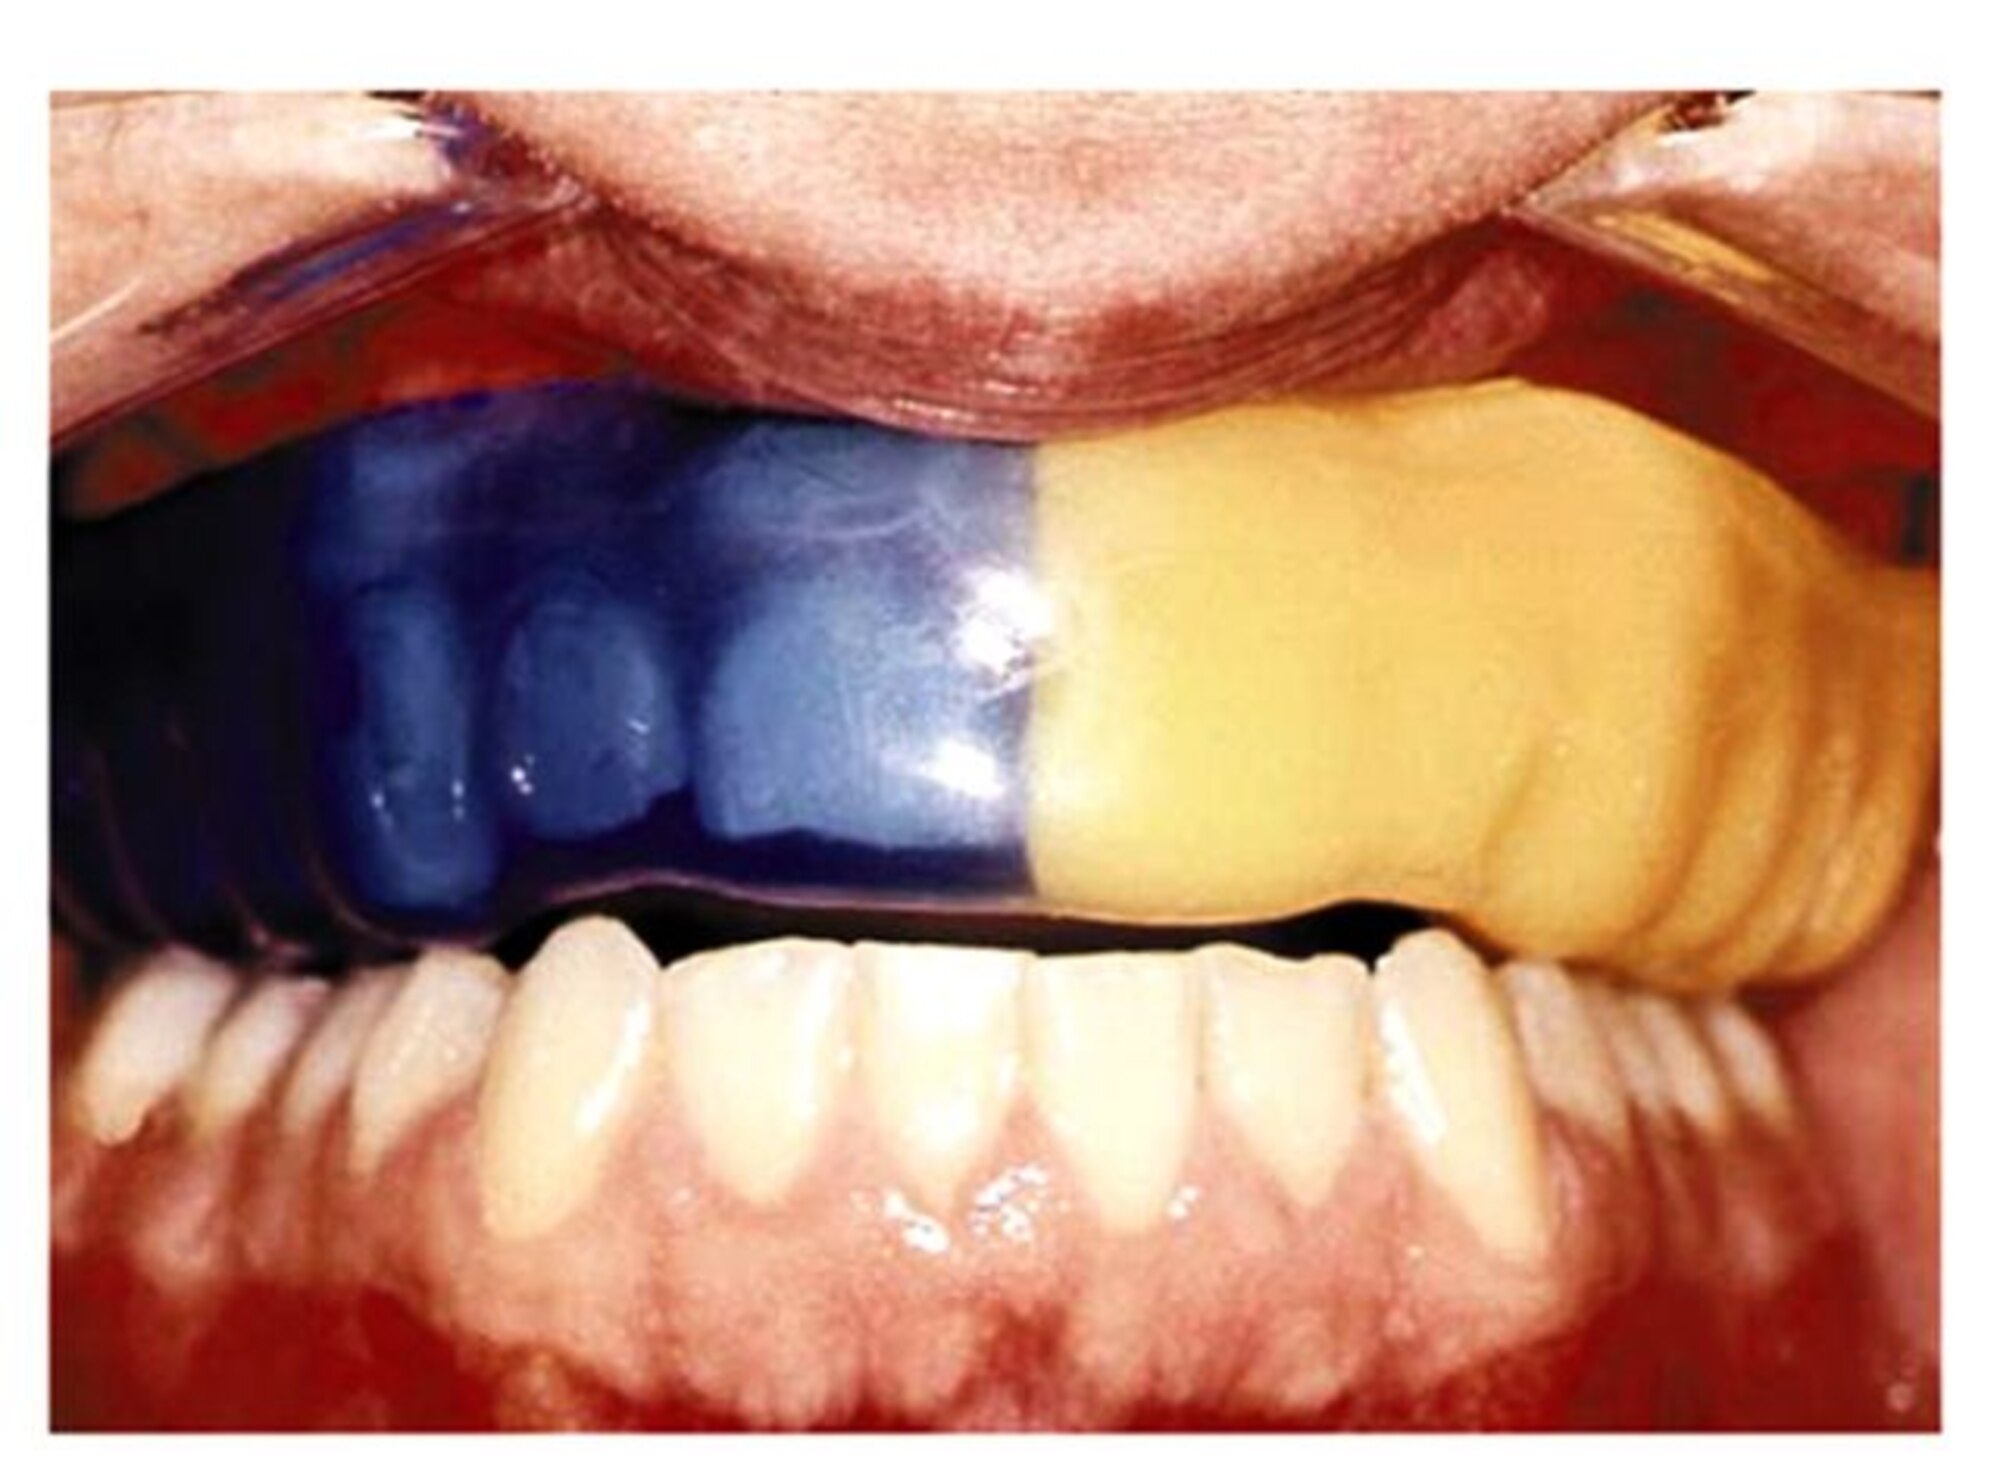 Mouthguards protect teeth (Courtesy graphic)